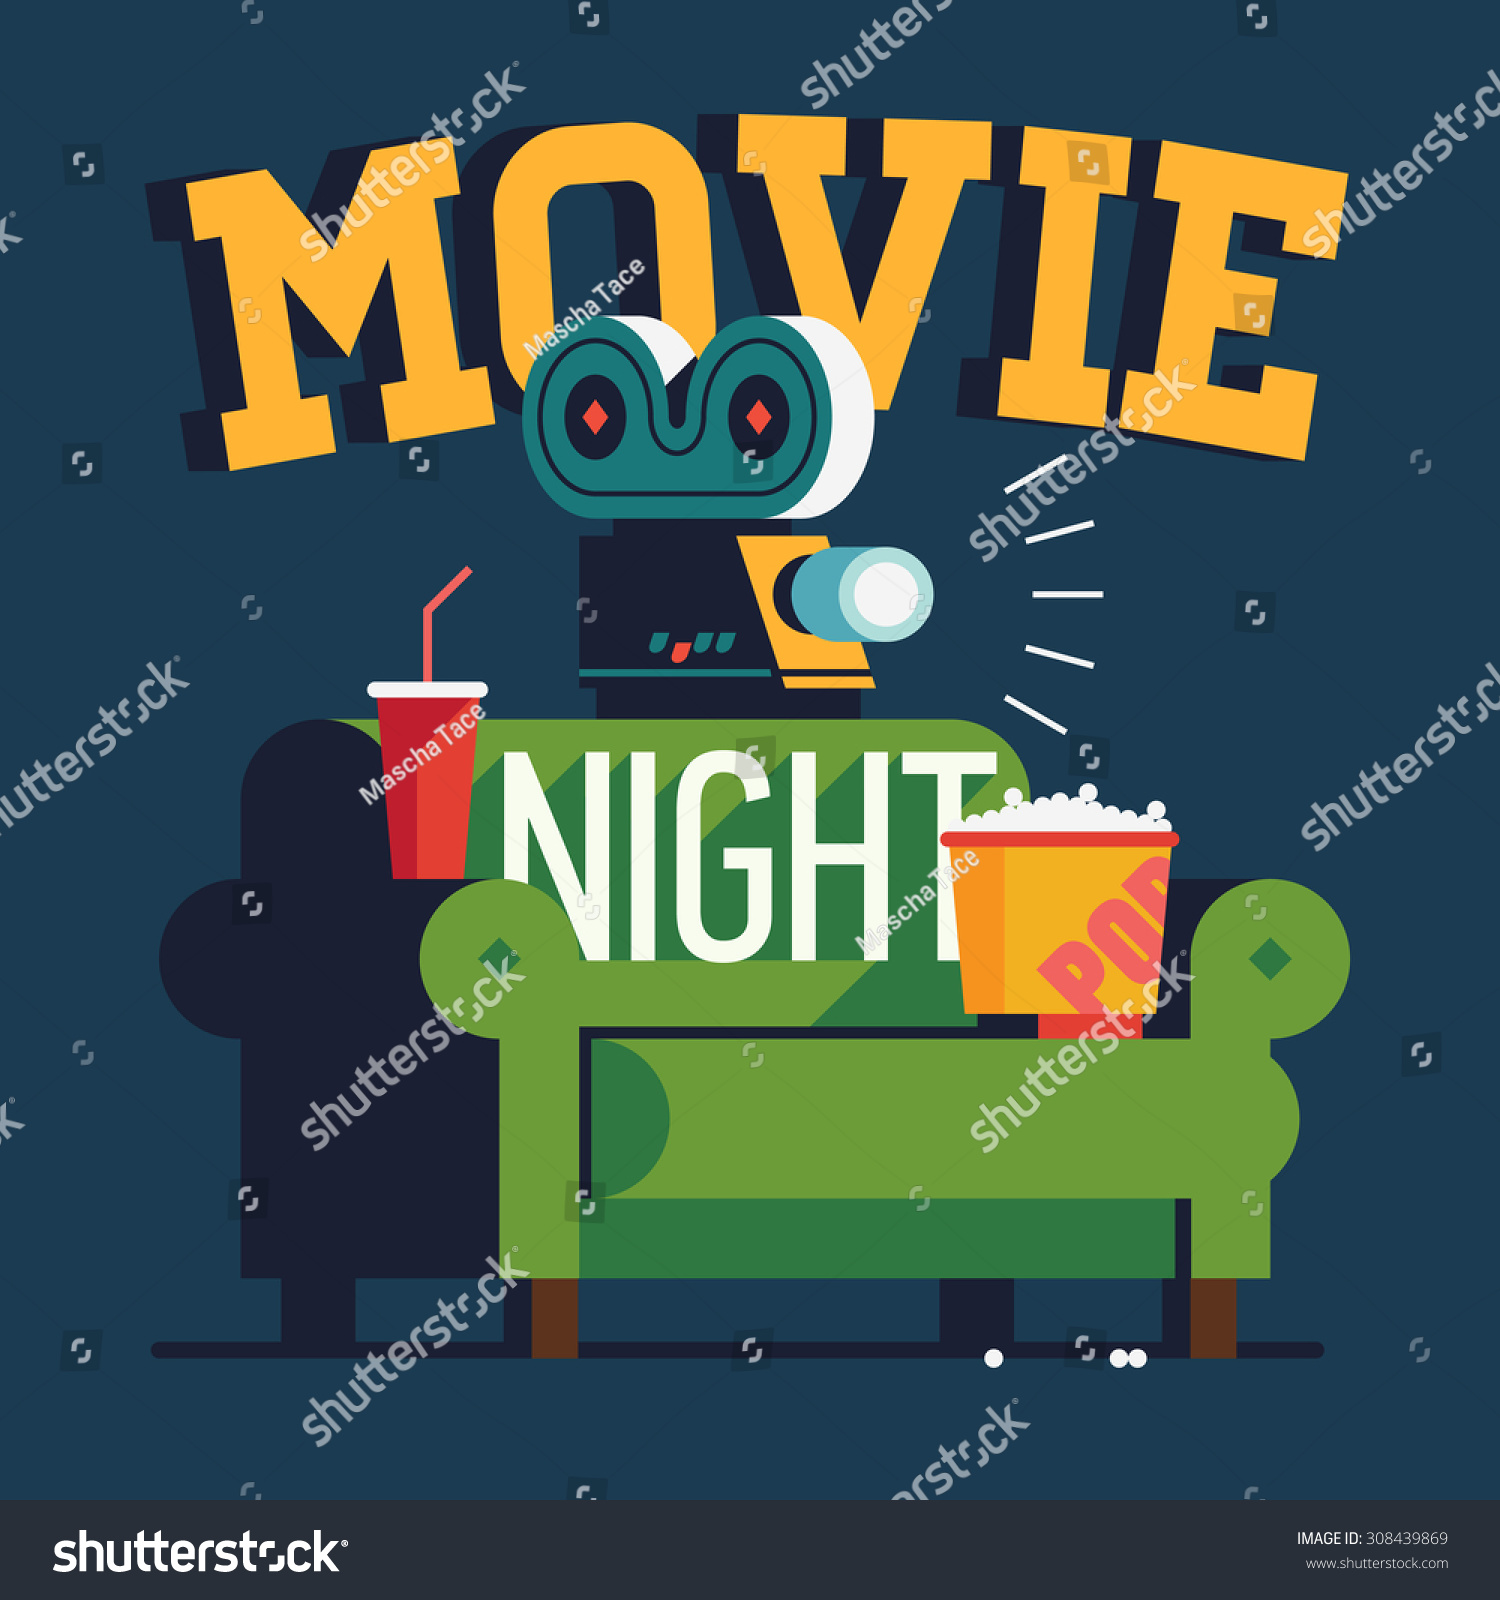 Download Cool Vector Movie Night Flat Design Stock Vector (Royalty Free) 308439869 - Shutterstock